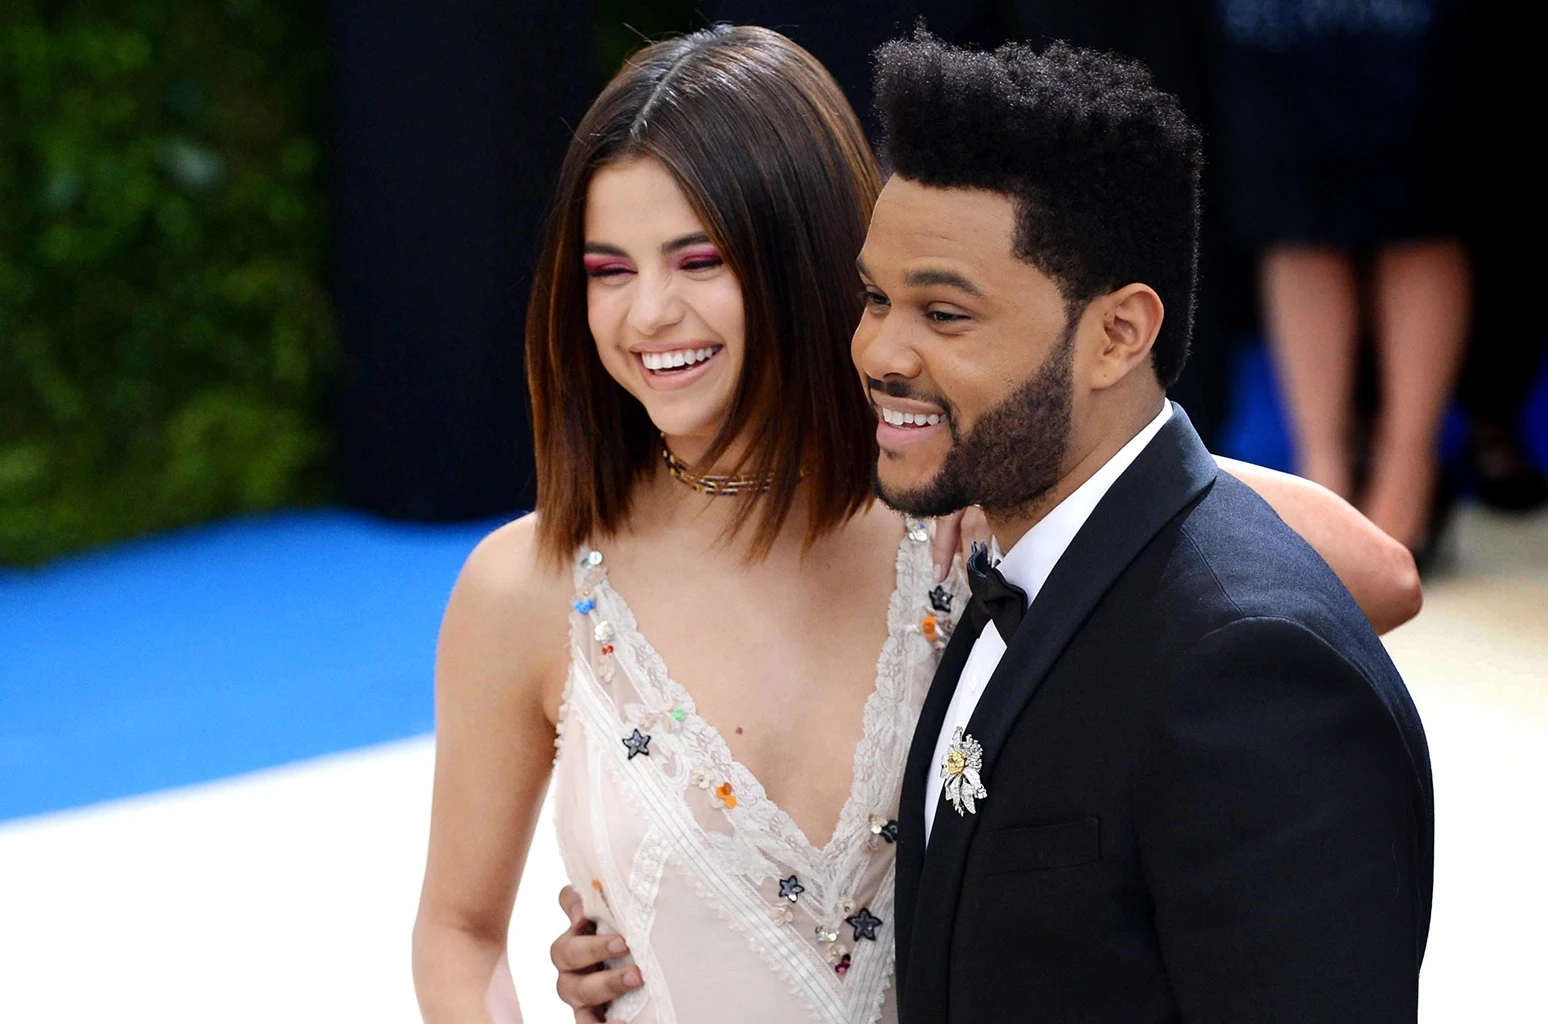 Gomez had a brief entanglement with The Weeknd